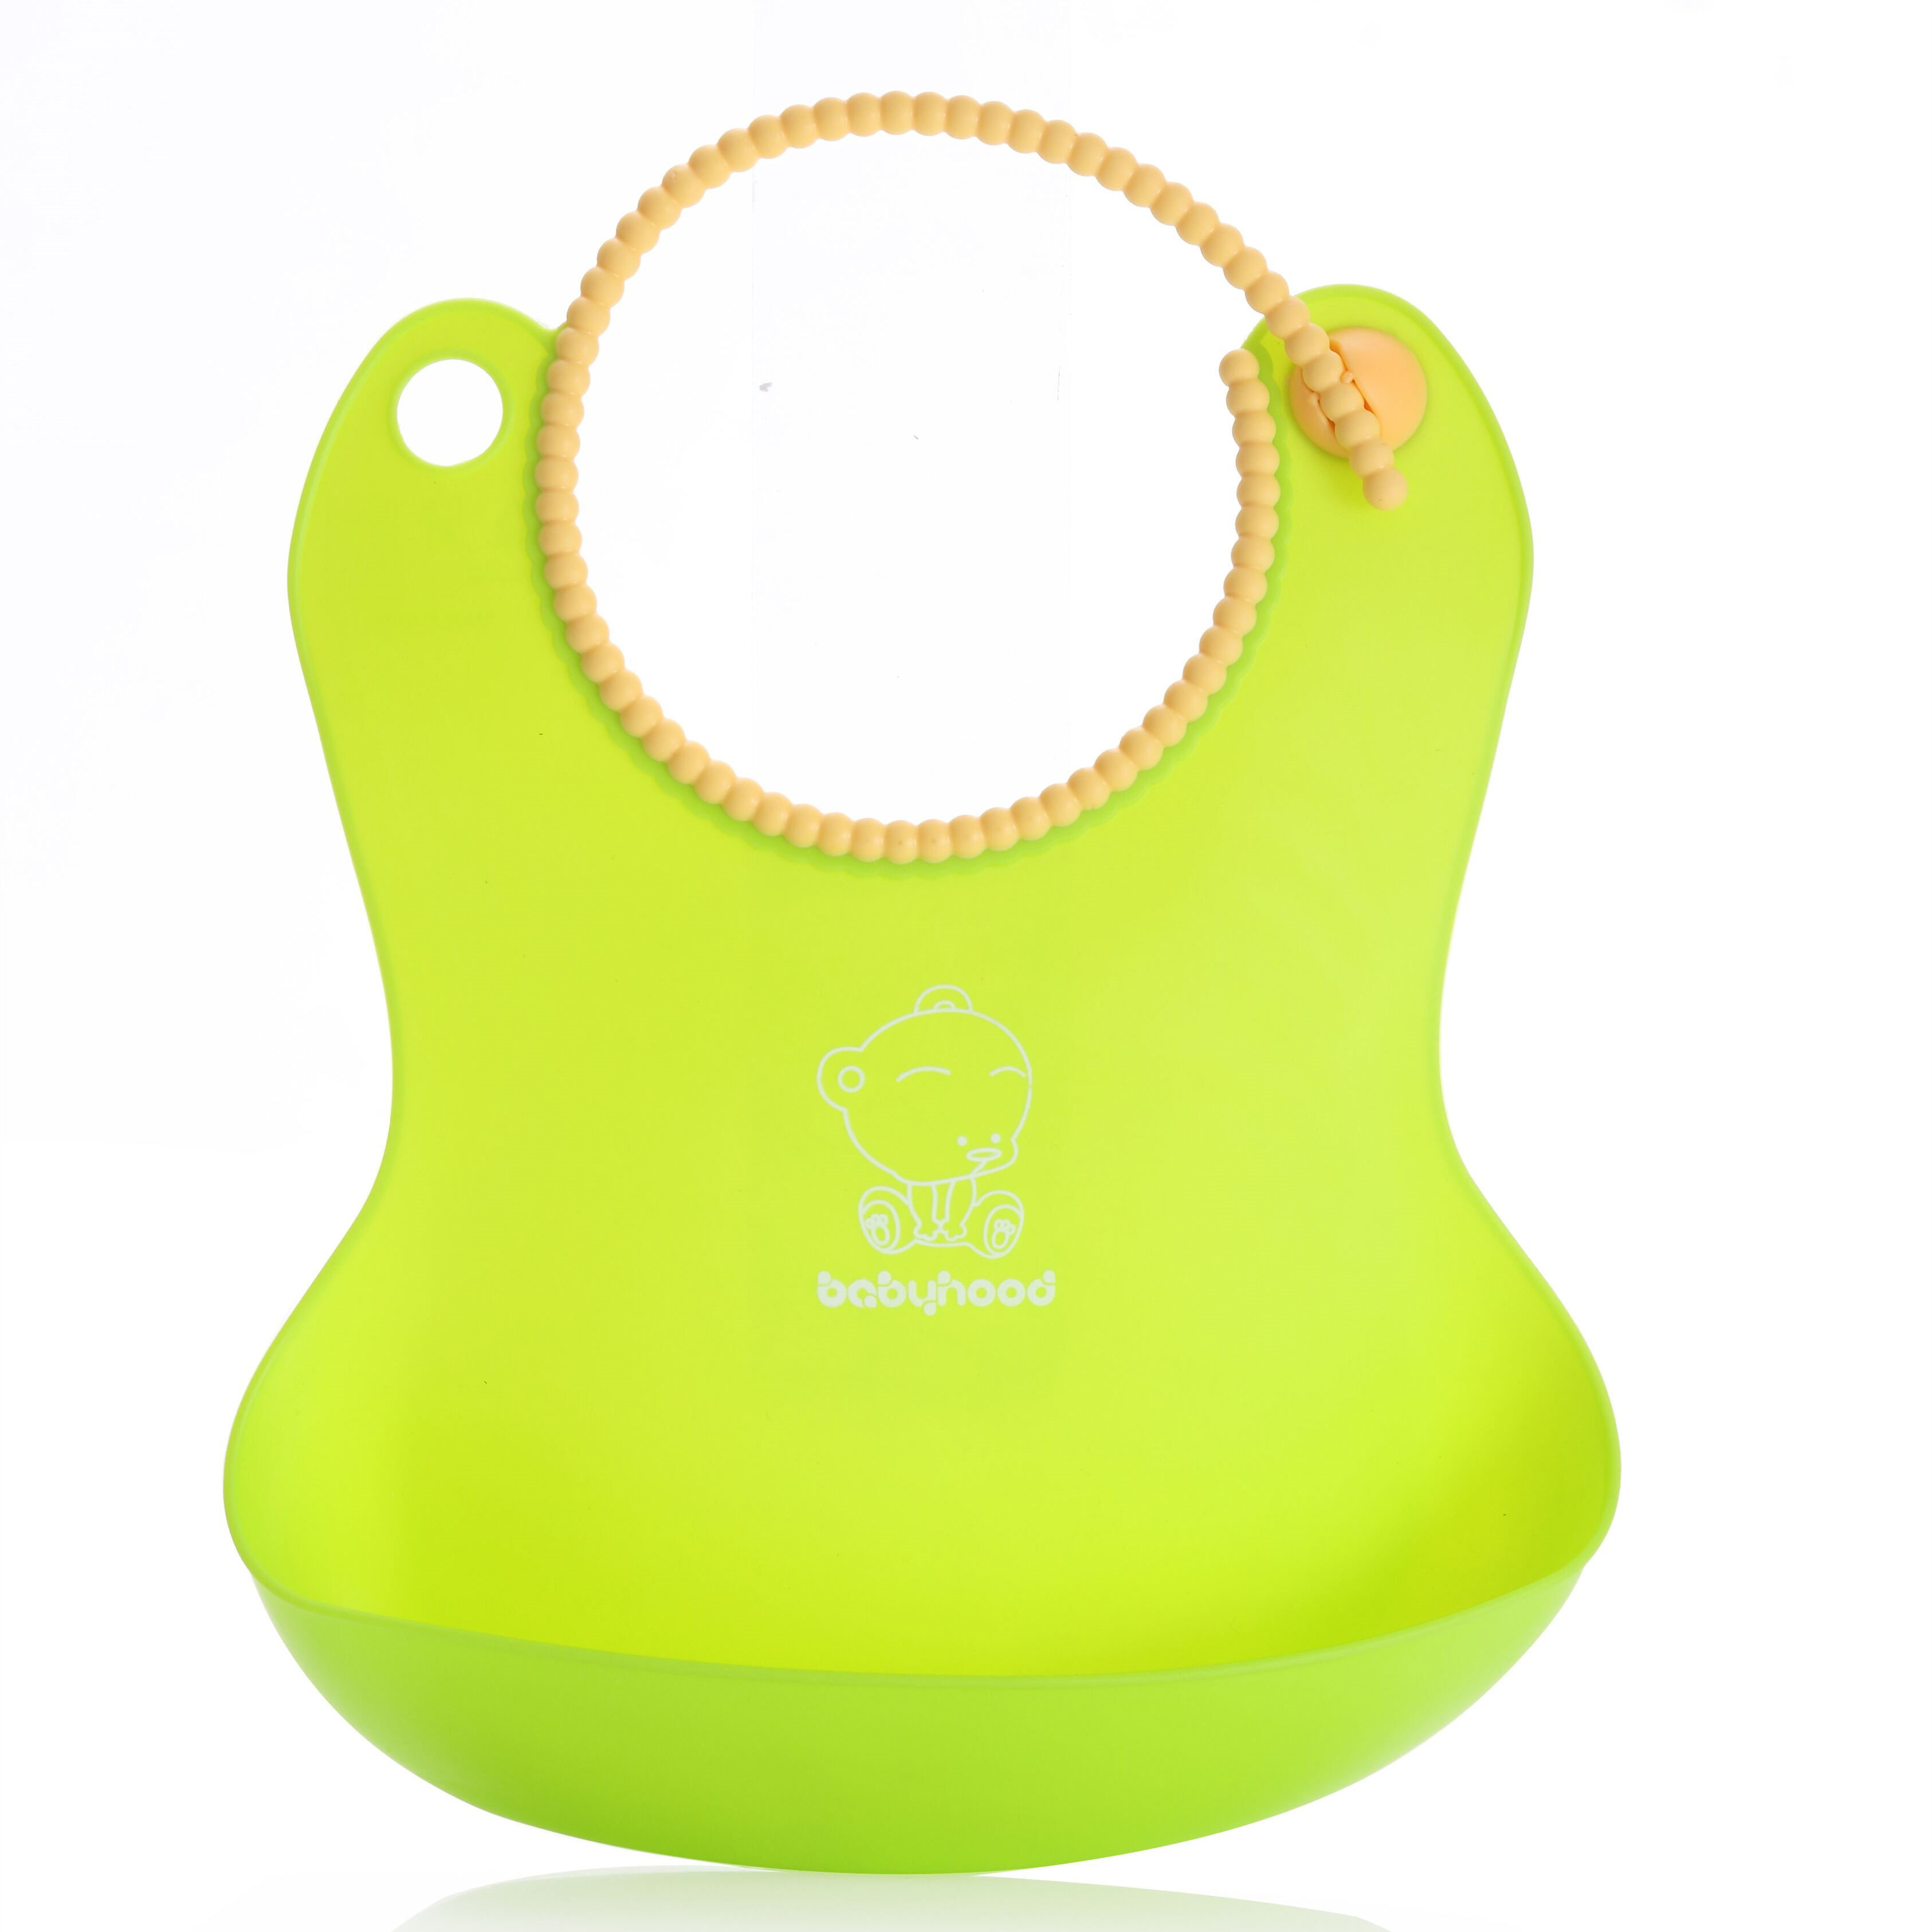 Wholesale Customized Waterproof Silicone Baby Bibs BH-401 Featured Image